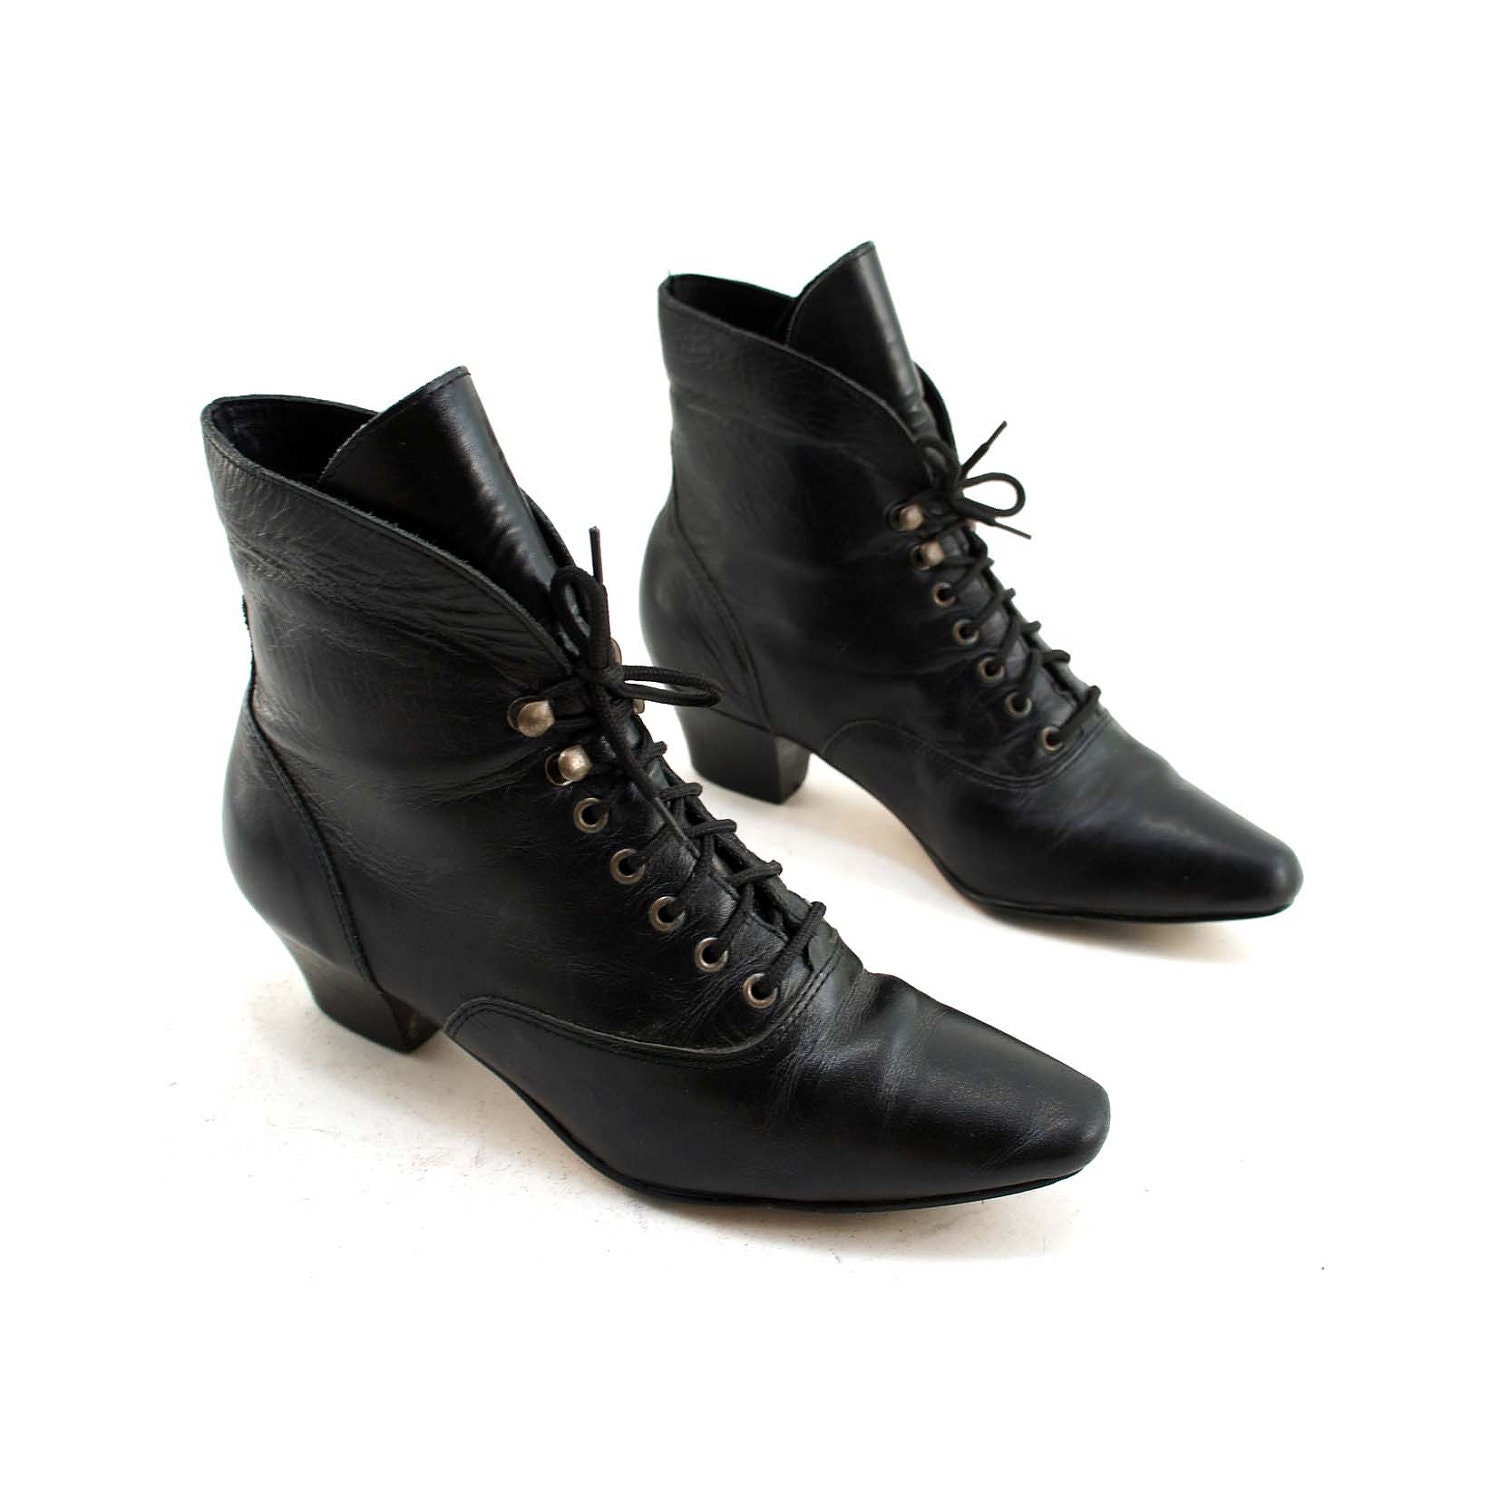 Witch Shoes: Black Leather Pointy Toe Ankle Boots with Pop up